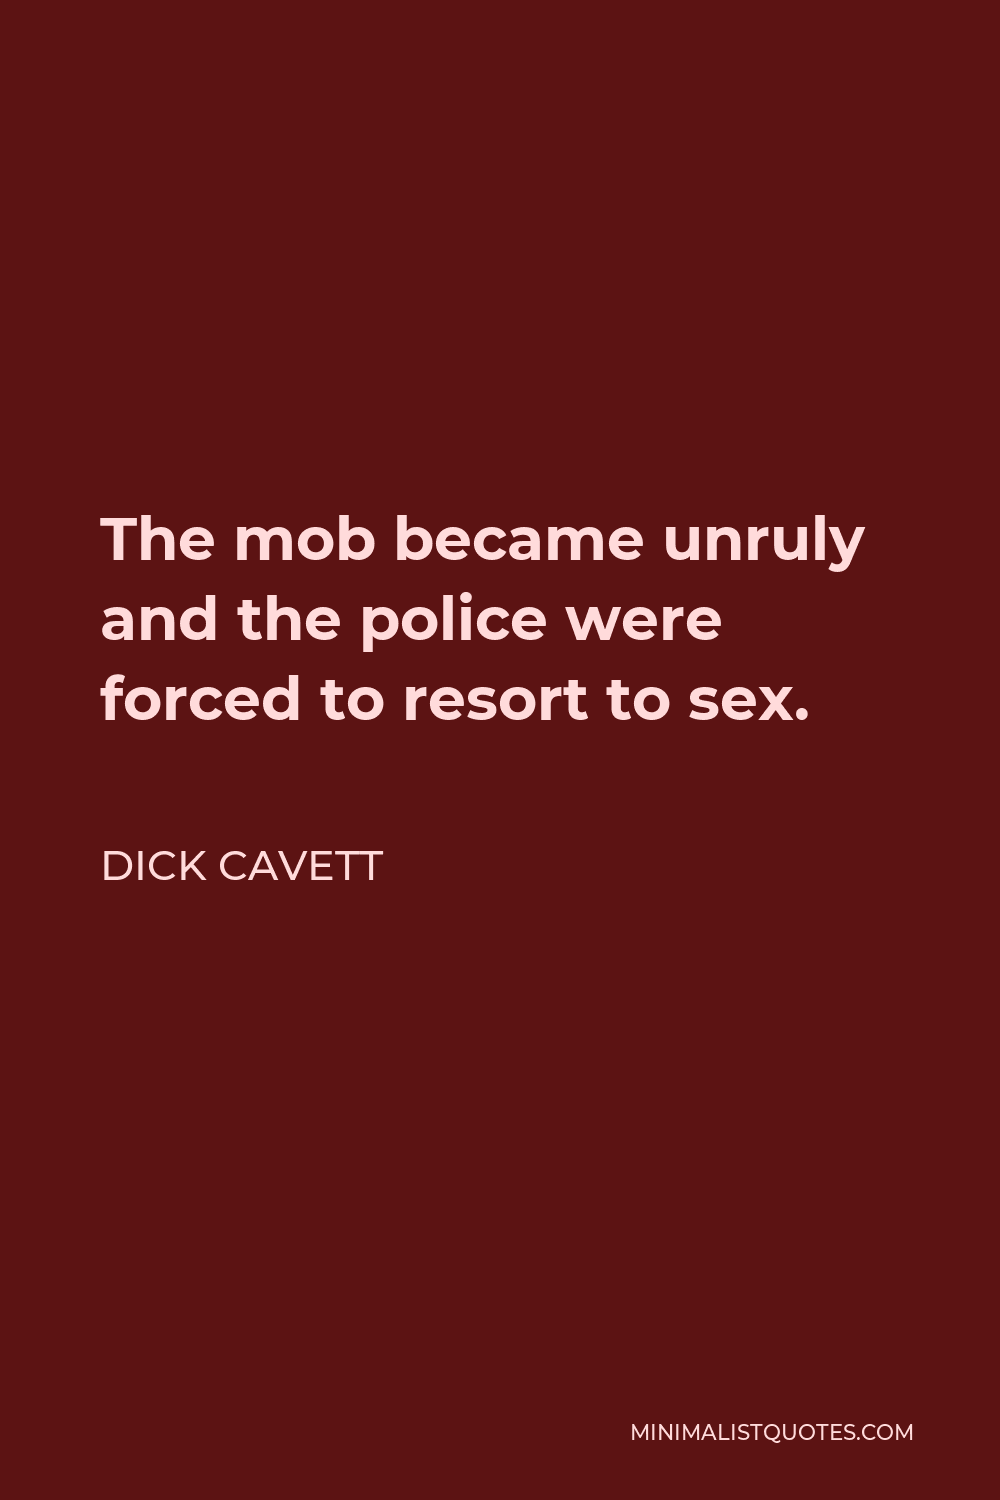 Dick Cavett Quote - The mob became unruly and the police were forced to resort to sex.